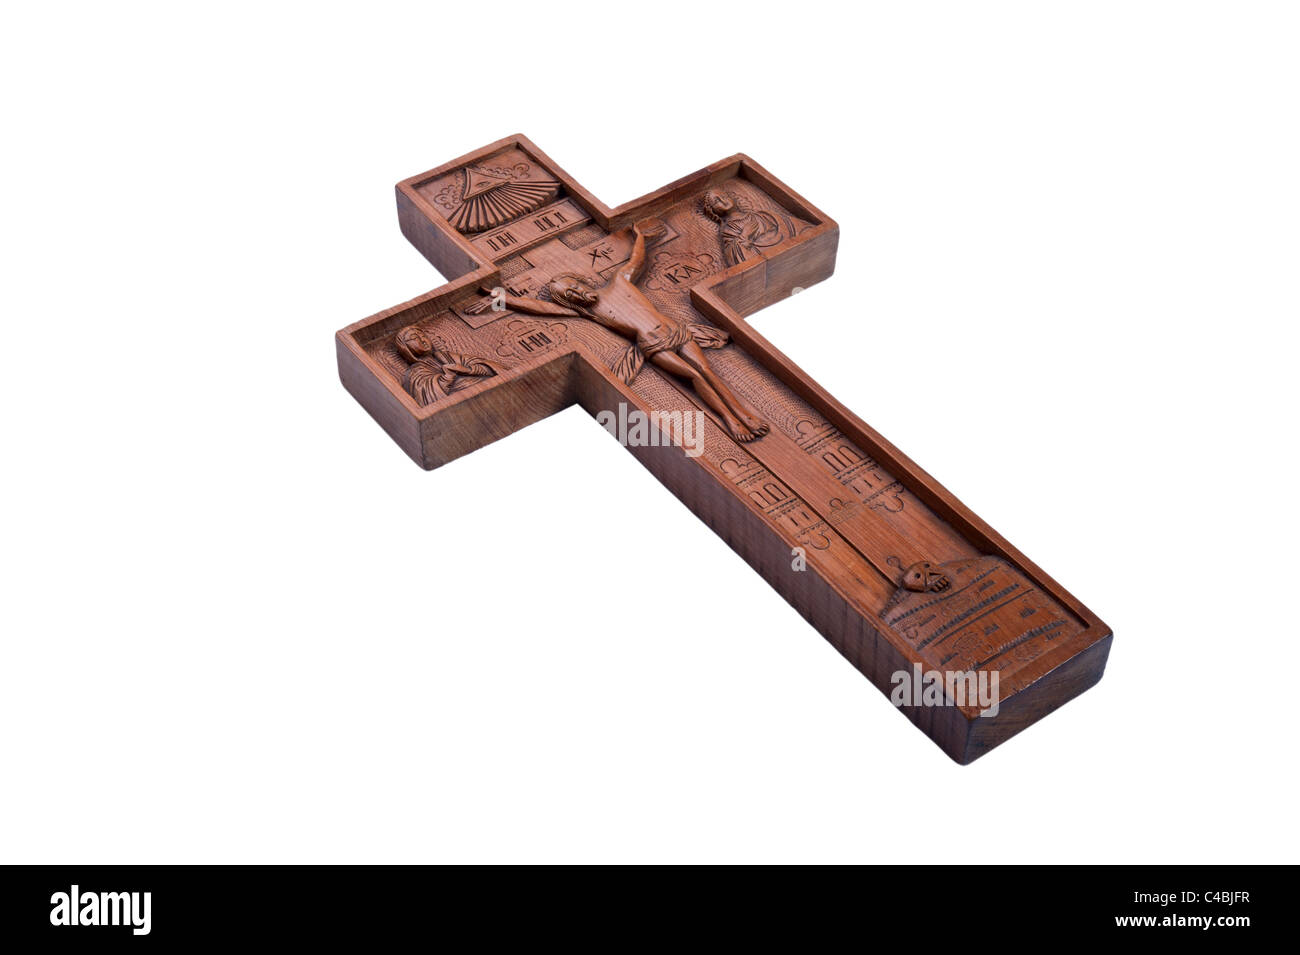 Wooden carving of Jesus on cross; isolated on white background Stock Photo